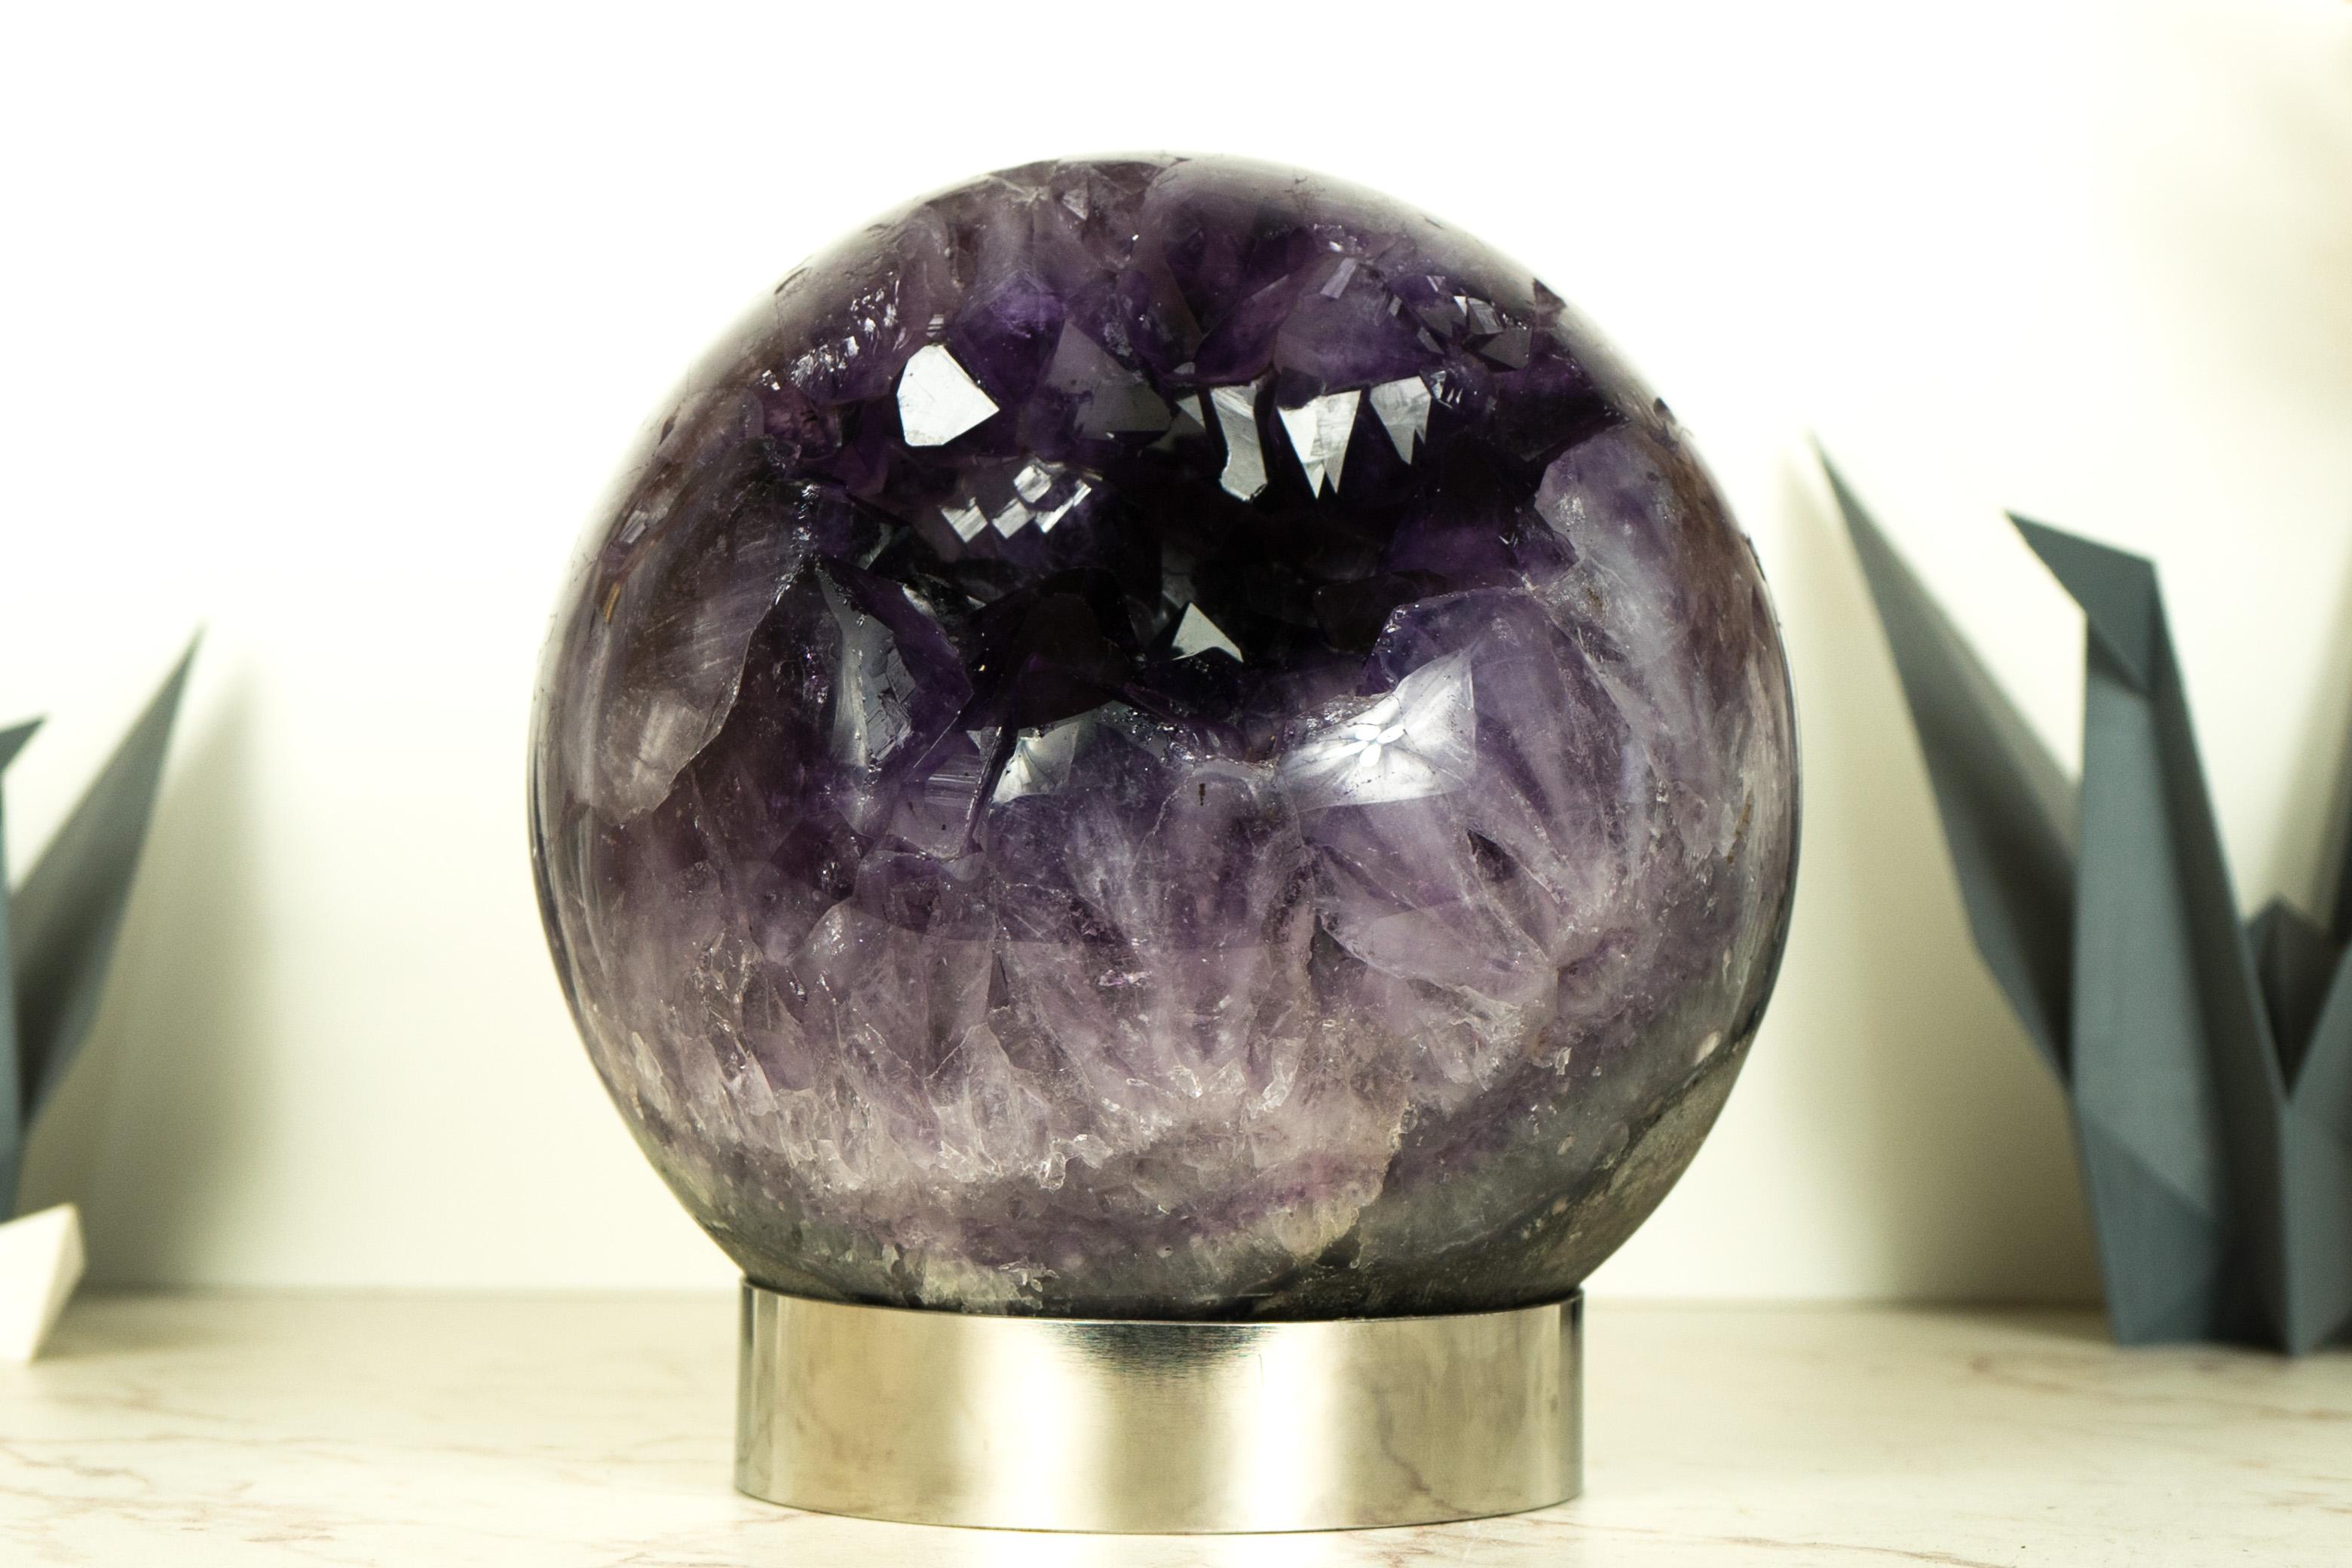 This X-Large Amethyst Sphere brings the utmost in terms of amethyst color, X Large size of the points and size of the specimen itself, and the overall gorgeous aesthetics of the sphere. Its exceptional size and superb quality make it a truly